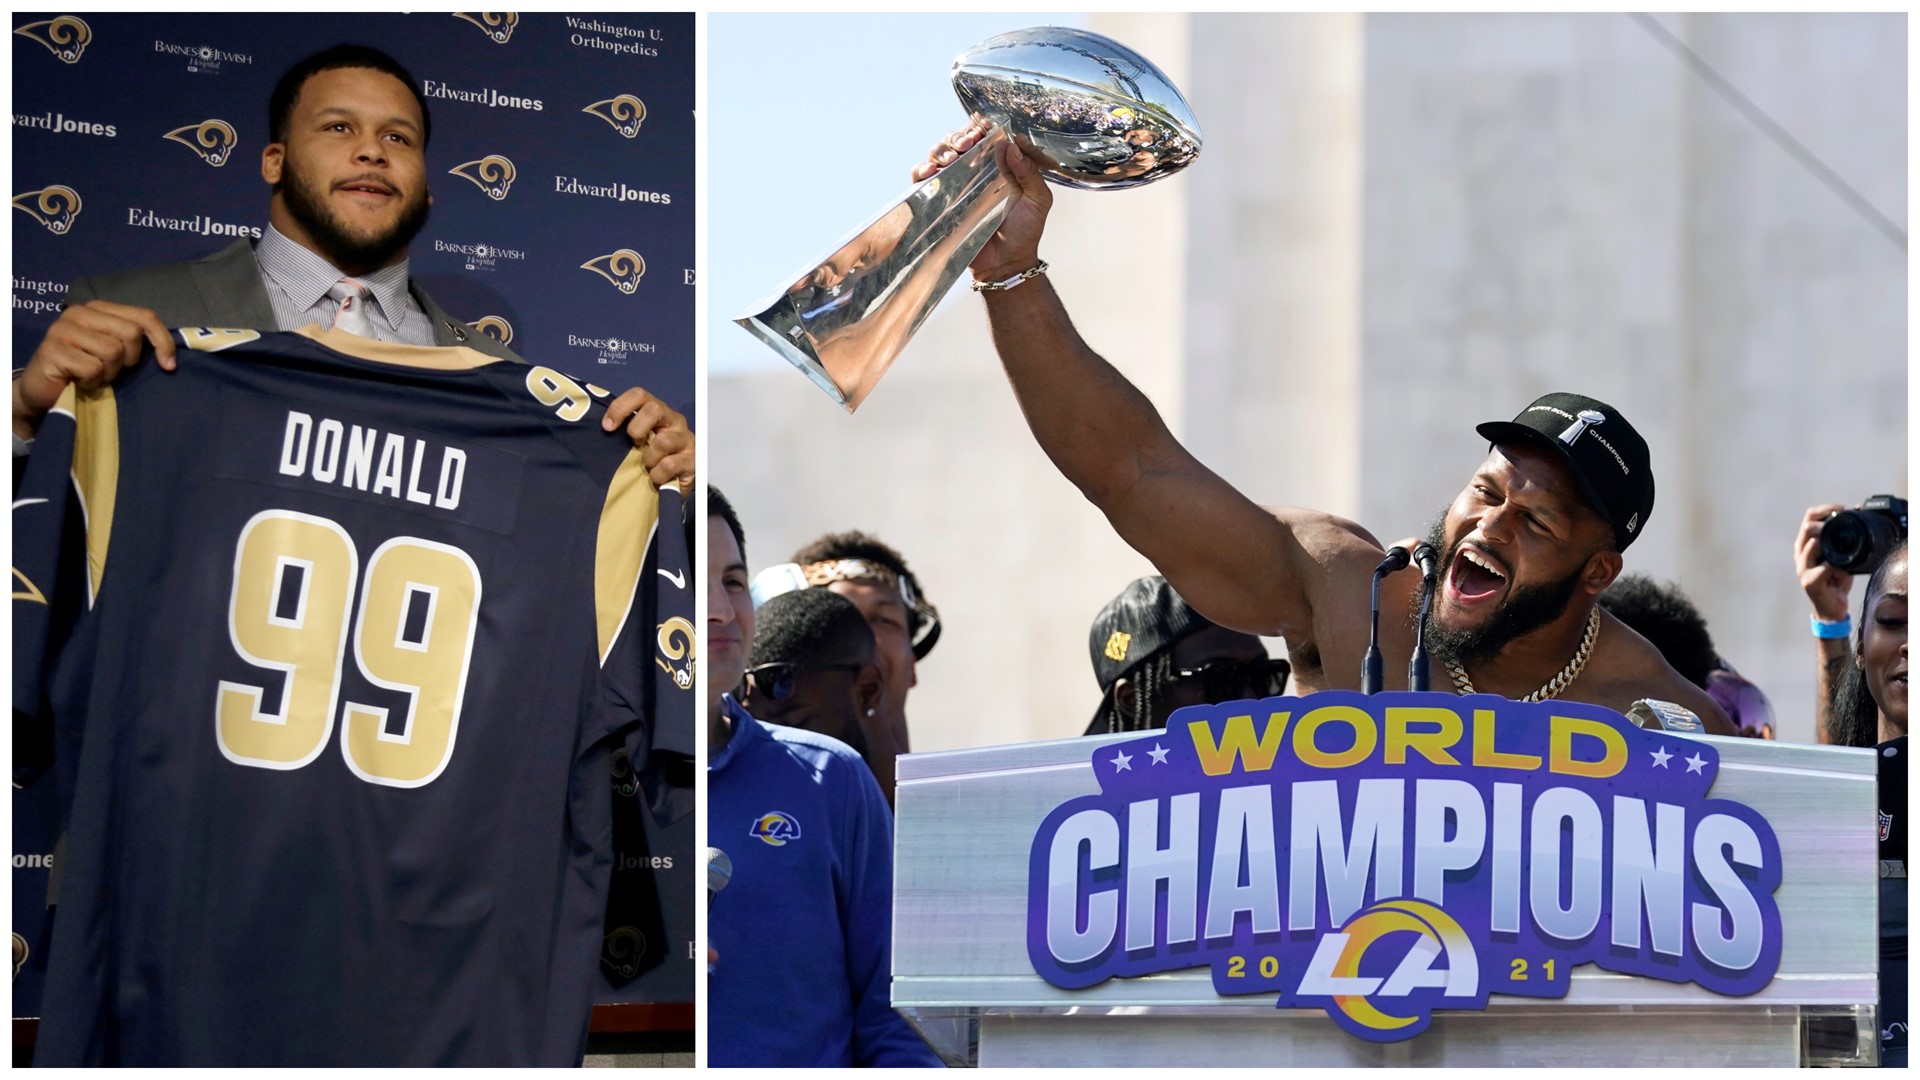 Aaron Donald was drafted by the St. Louis Rams in 2014. He won a Super Bowl with the team after the franchise moved to Los Angeles.